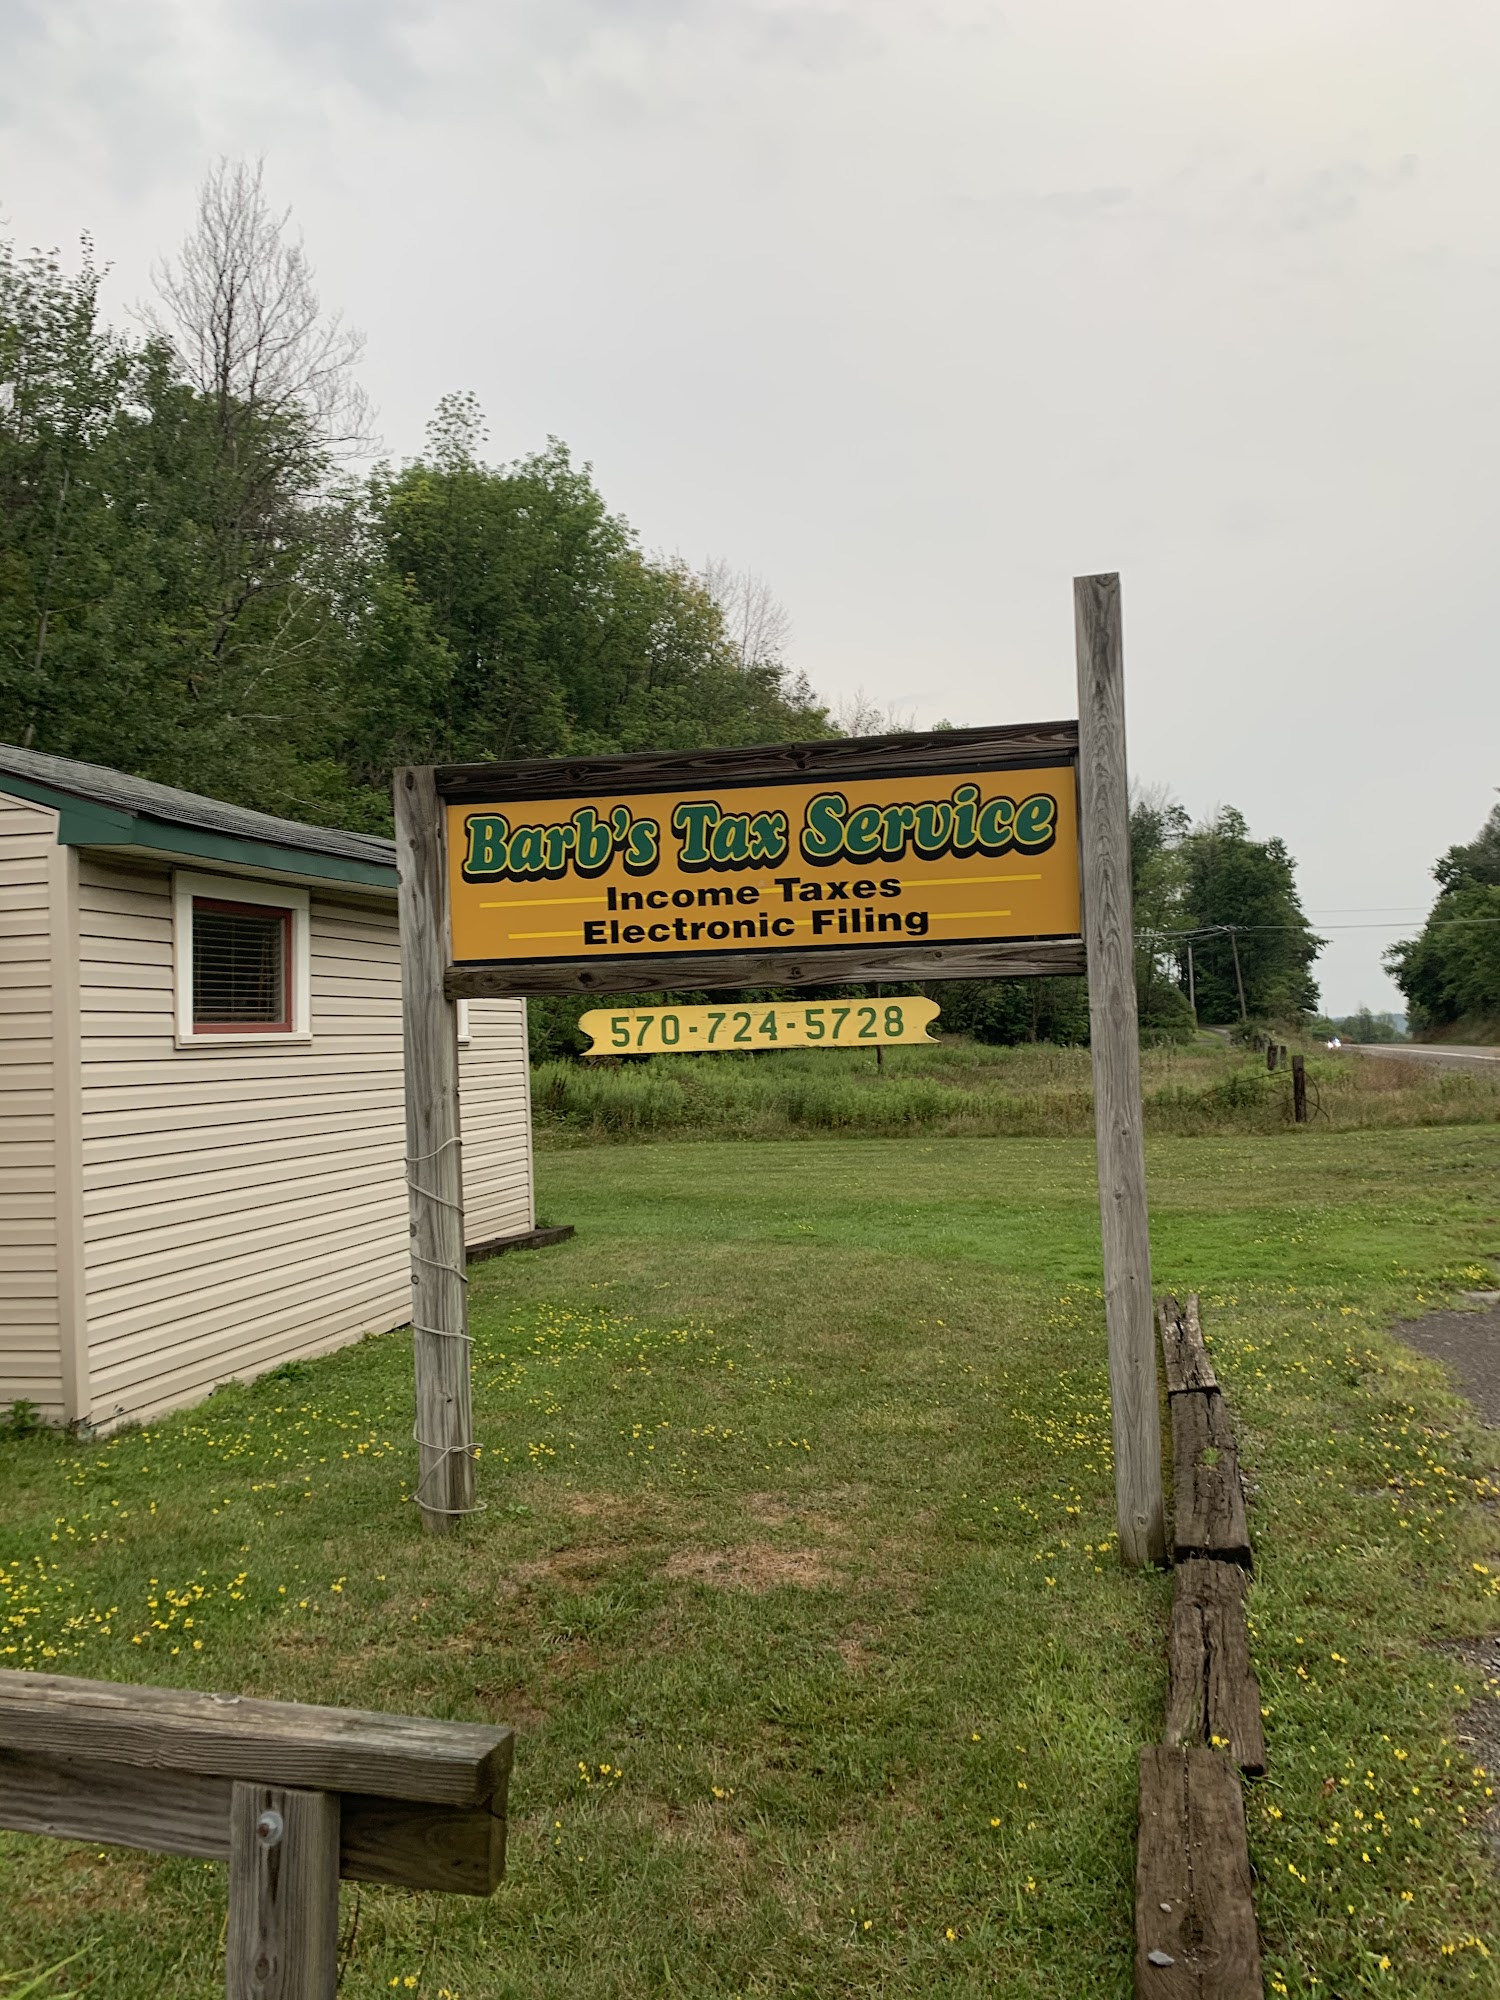 Barb's Tax Services 13373 Old Rte 6, Mansfield Pennsylvania 16933